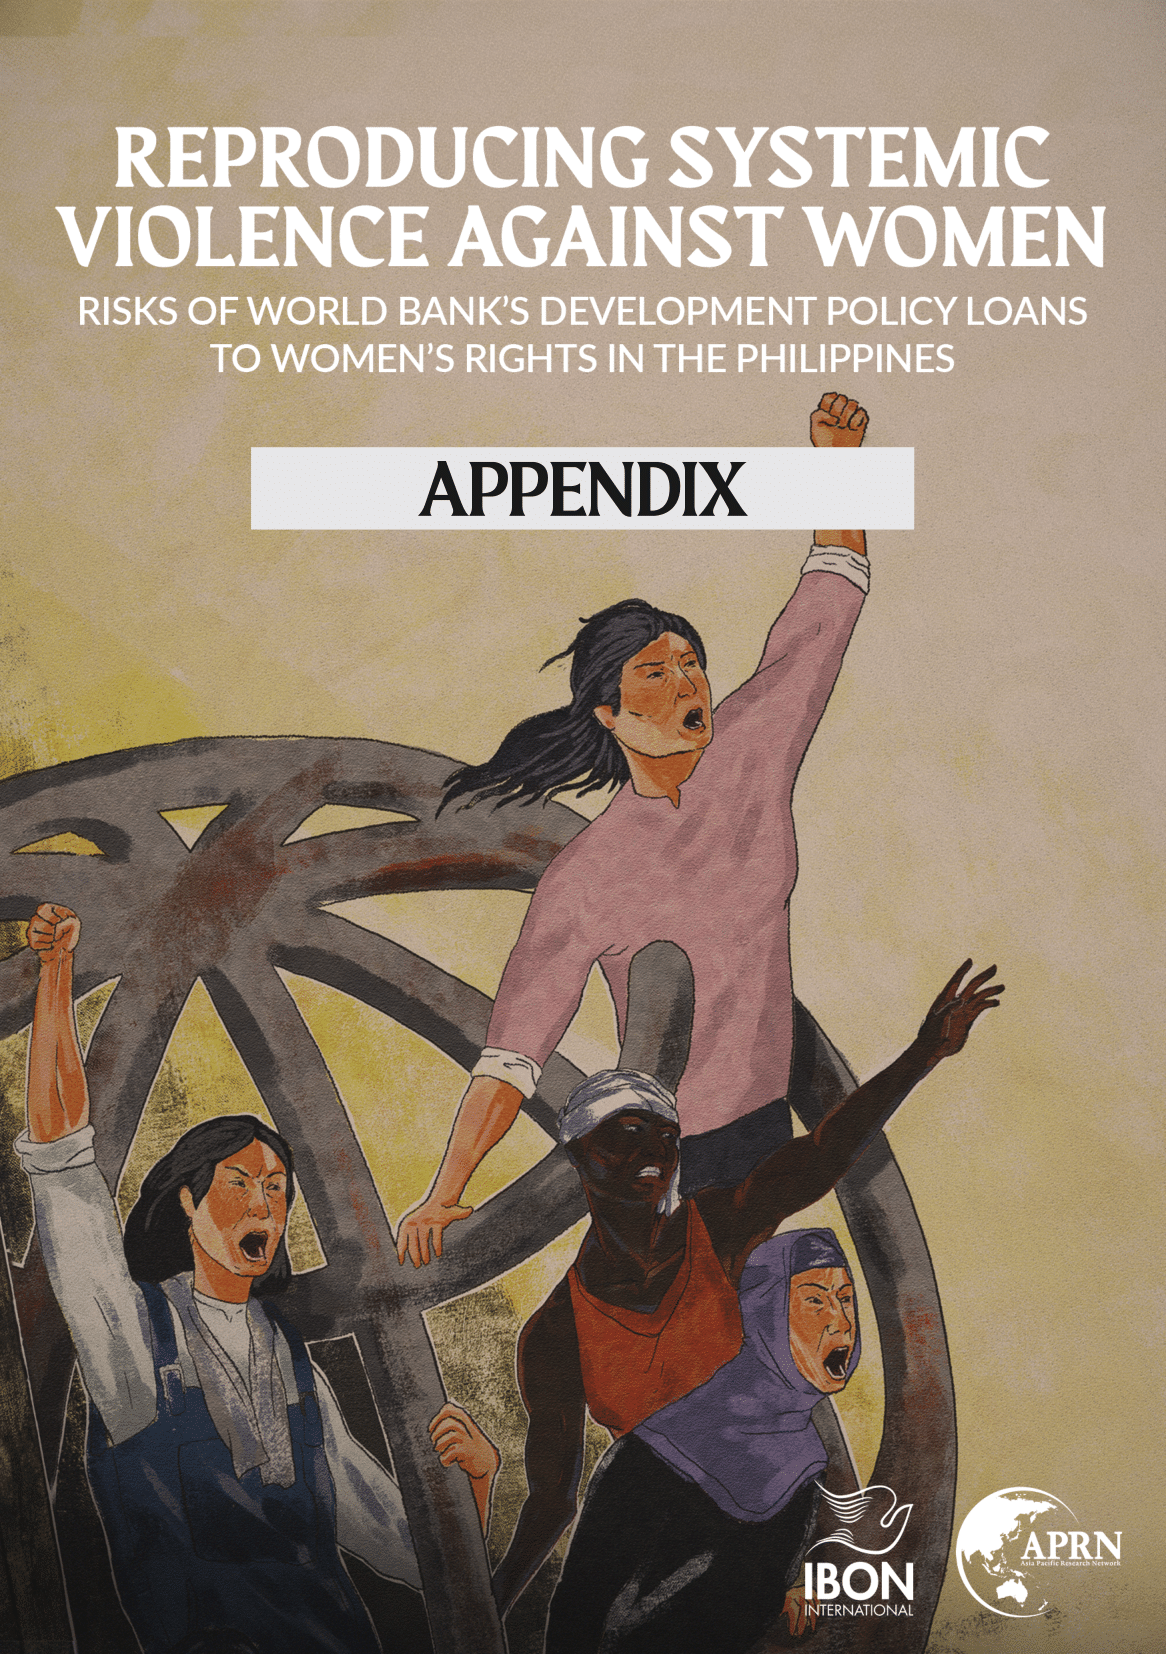 You are currently viewing [APPENDIX] Reproducing systemic violence against women: Risks of World Bank’s Development Policy Loans to women’s rights in the Philippines